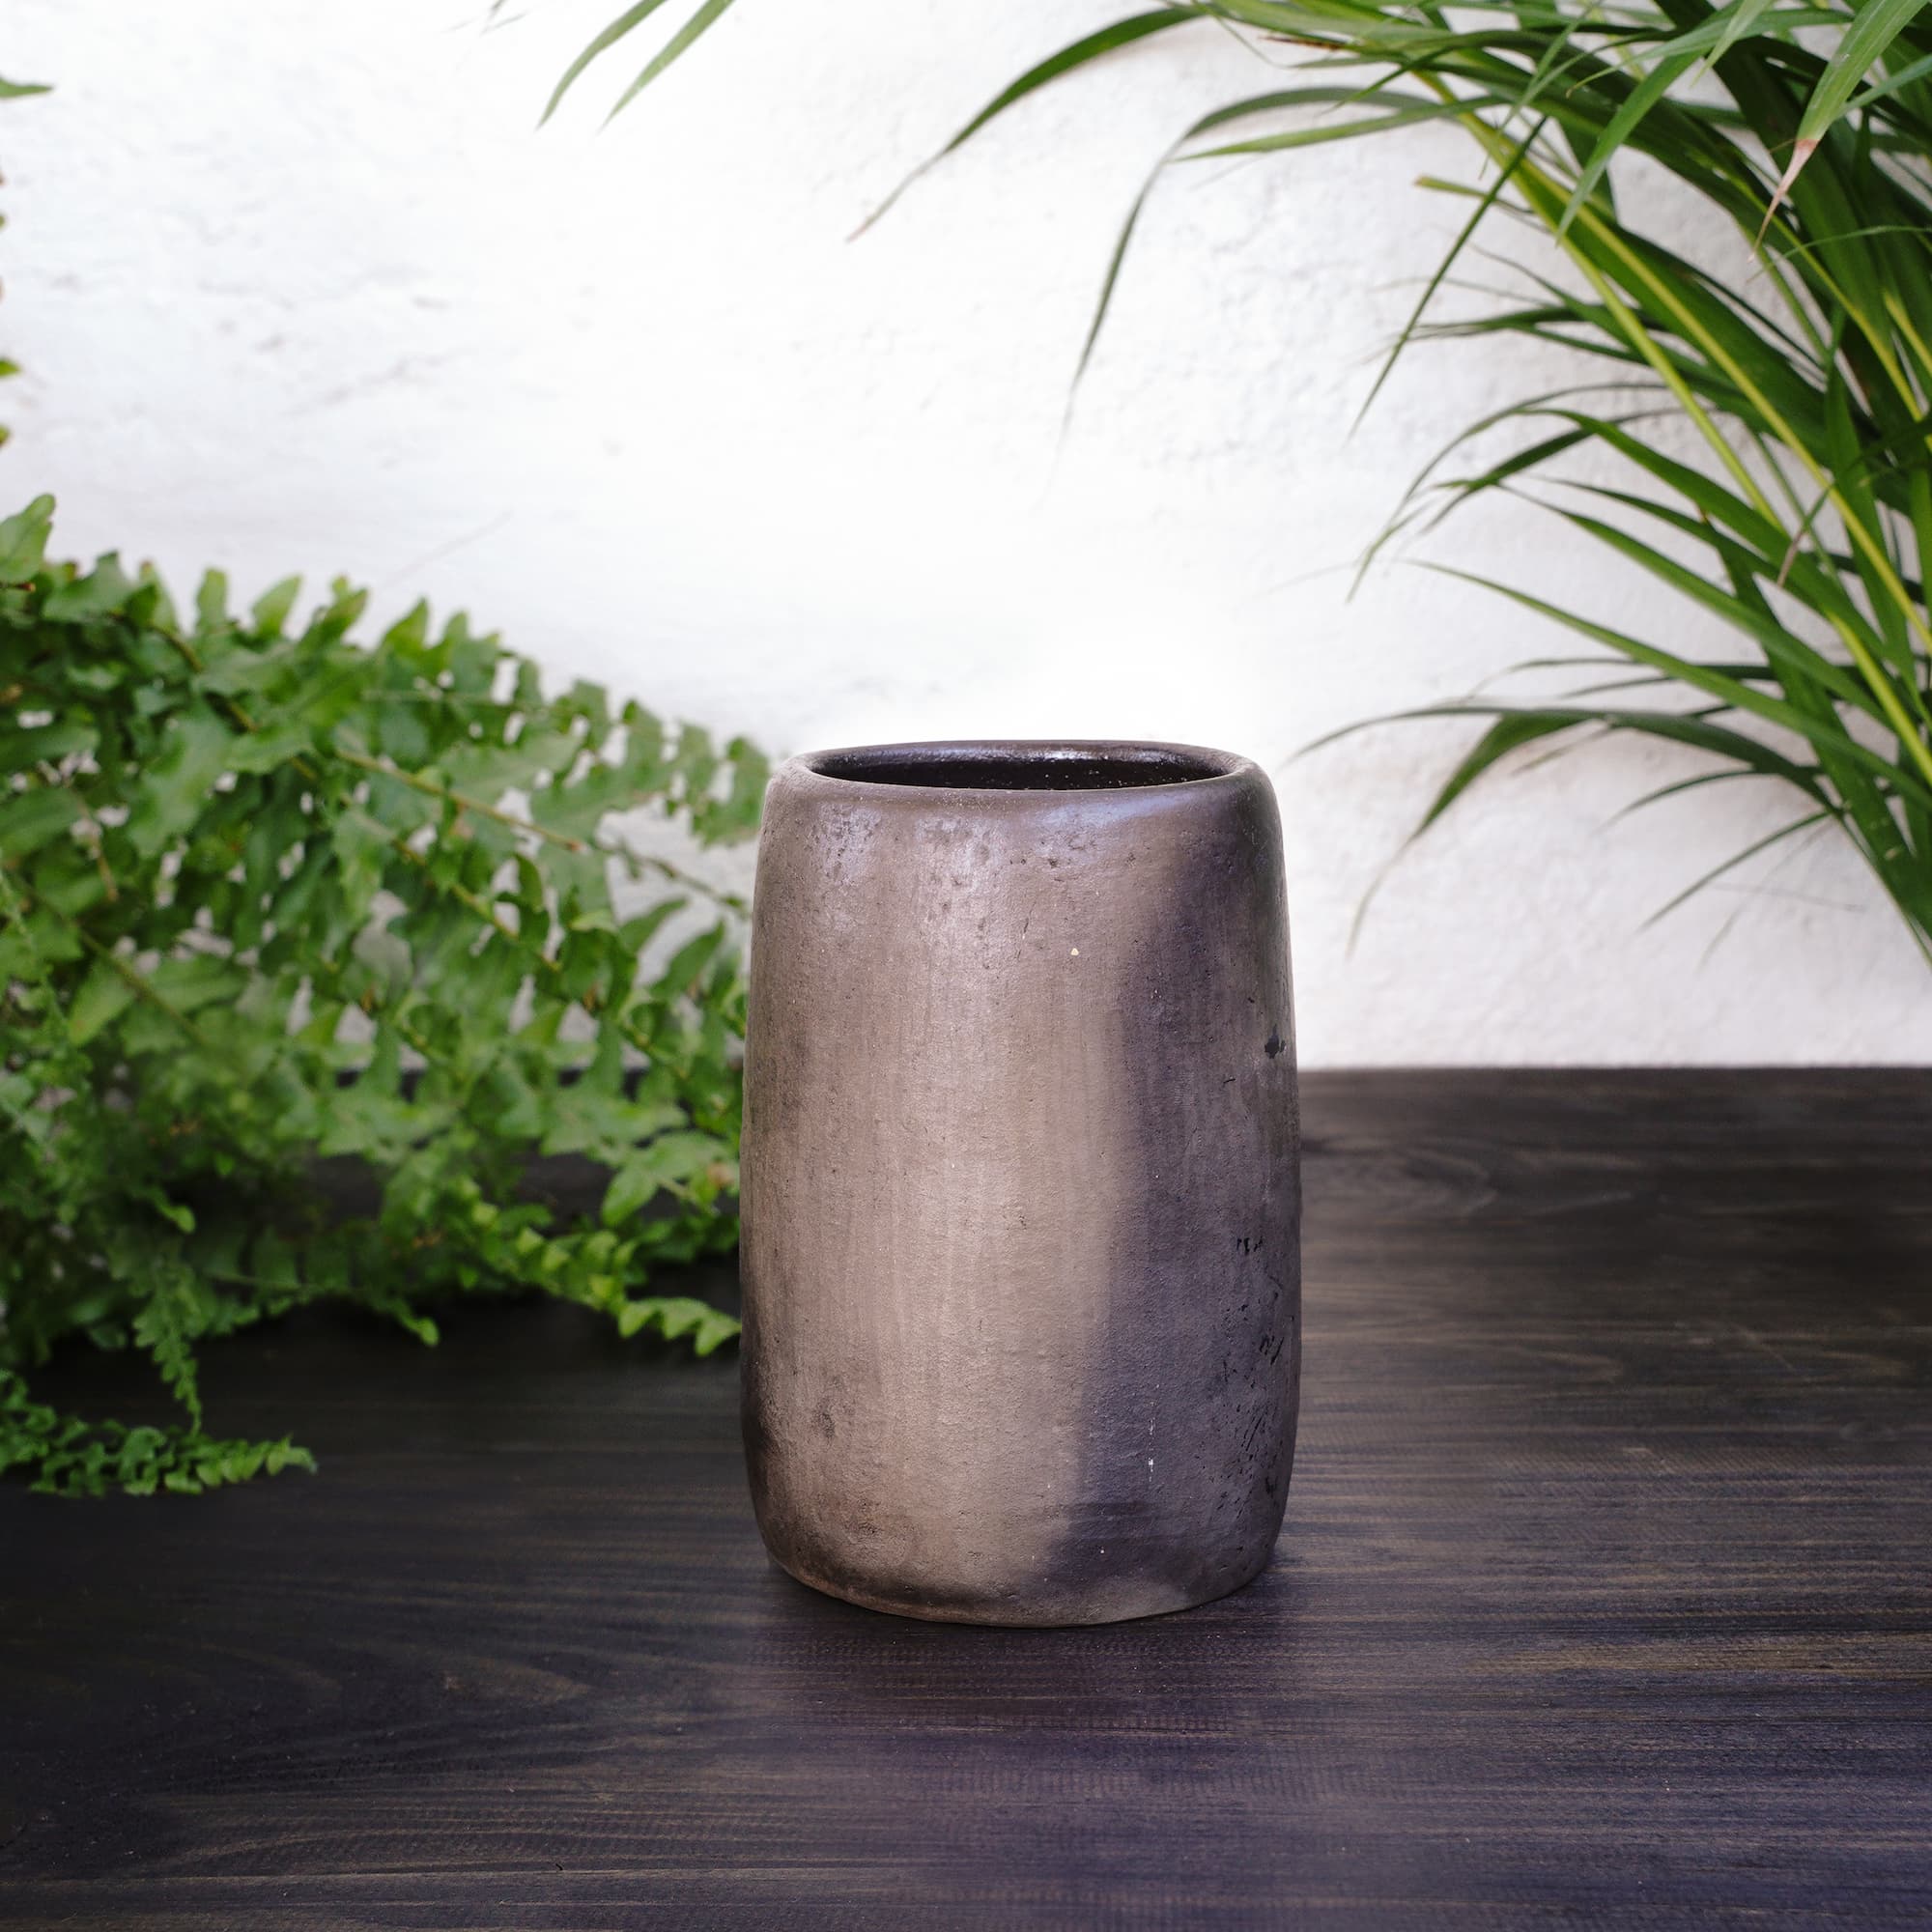 Back view of the large unique vase, perfect for modern and designer home decor.